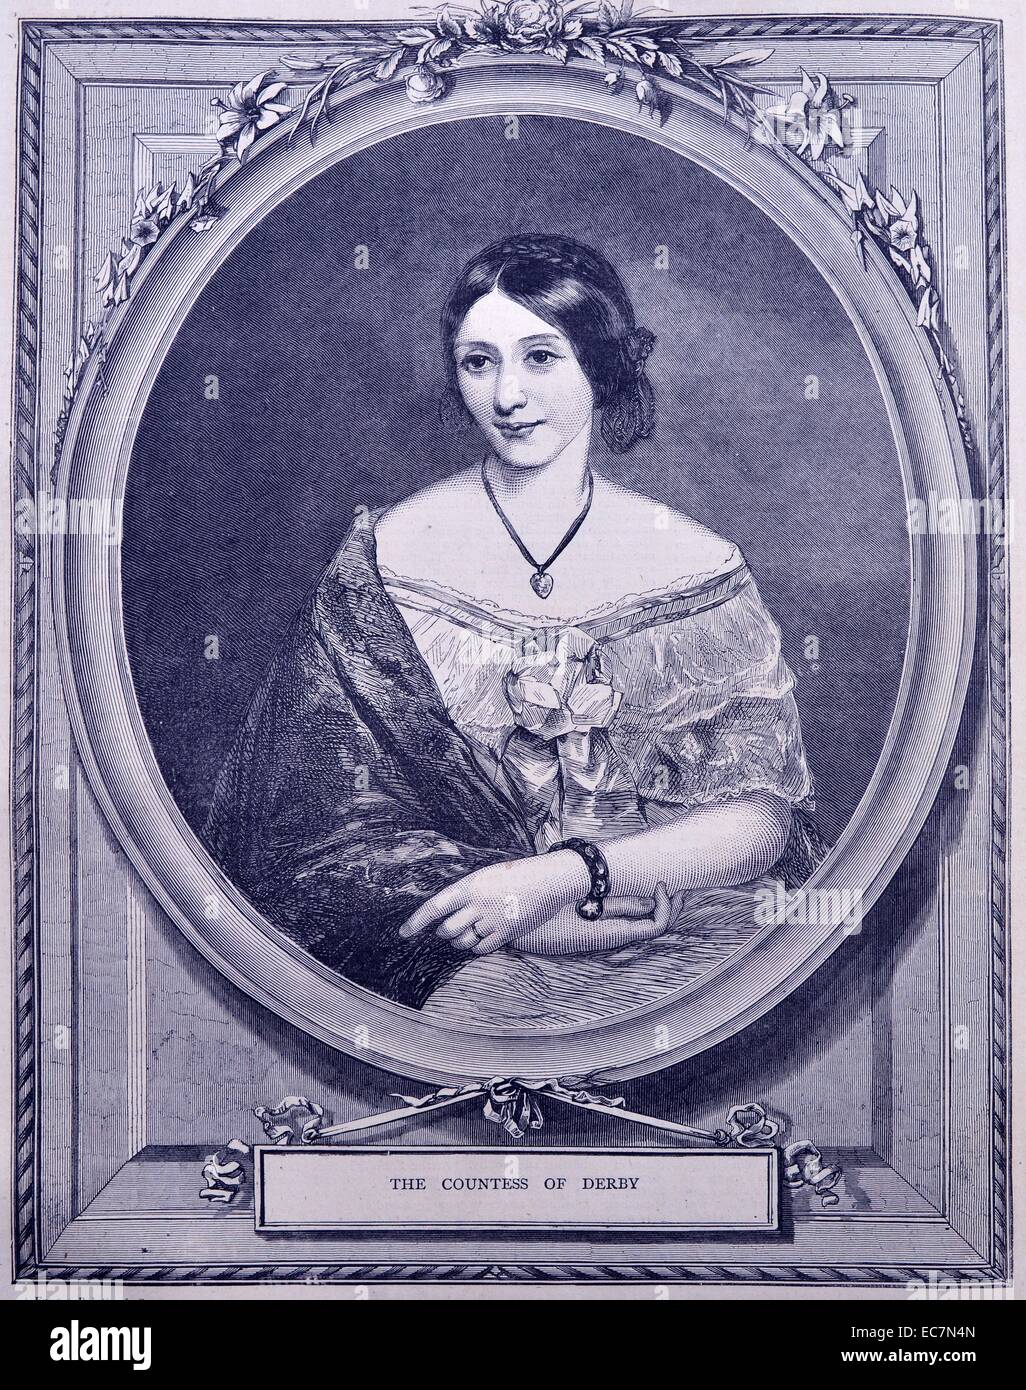 Engraving of the Countess of Derby. Dated 1870 Stock Photo